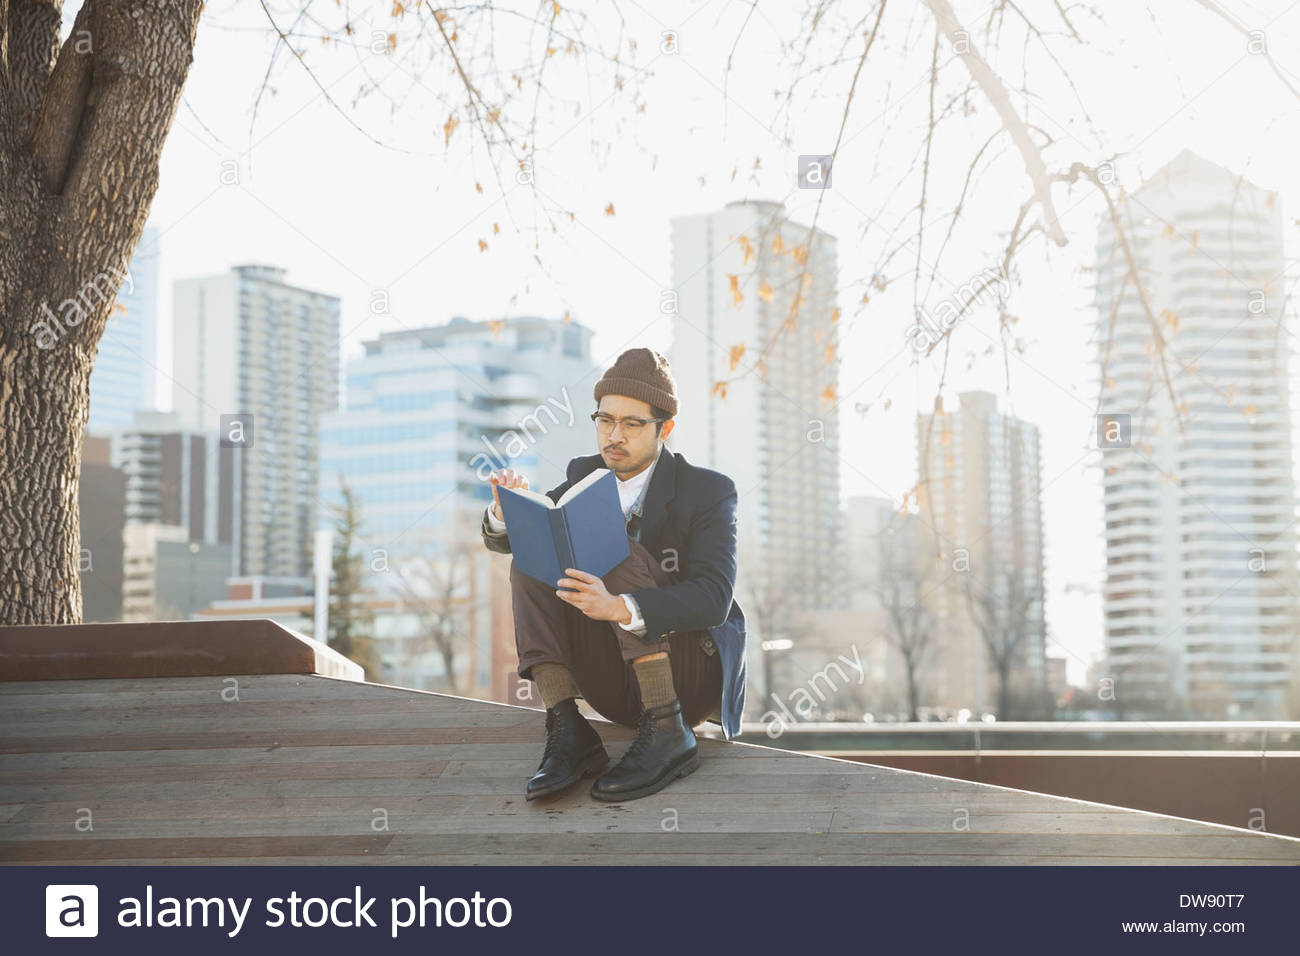 Man reading book outdoors against cityscape Stock Photo